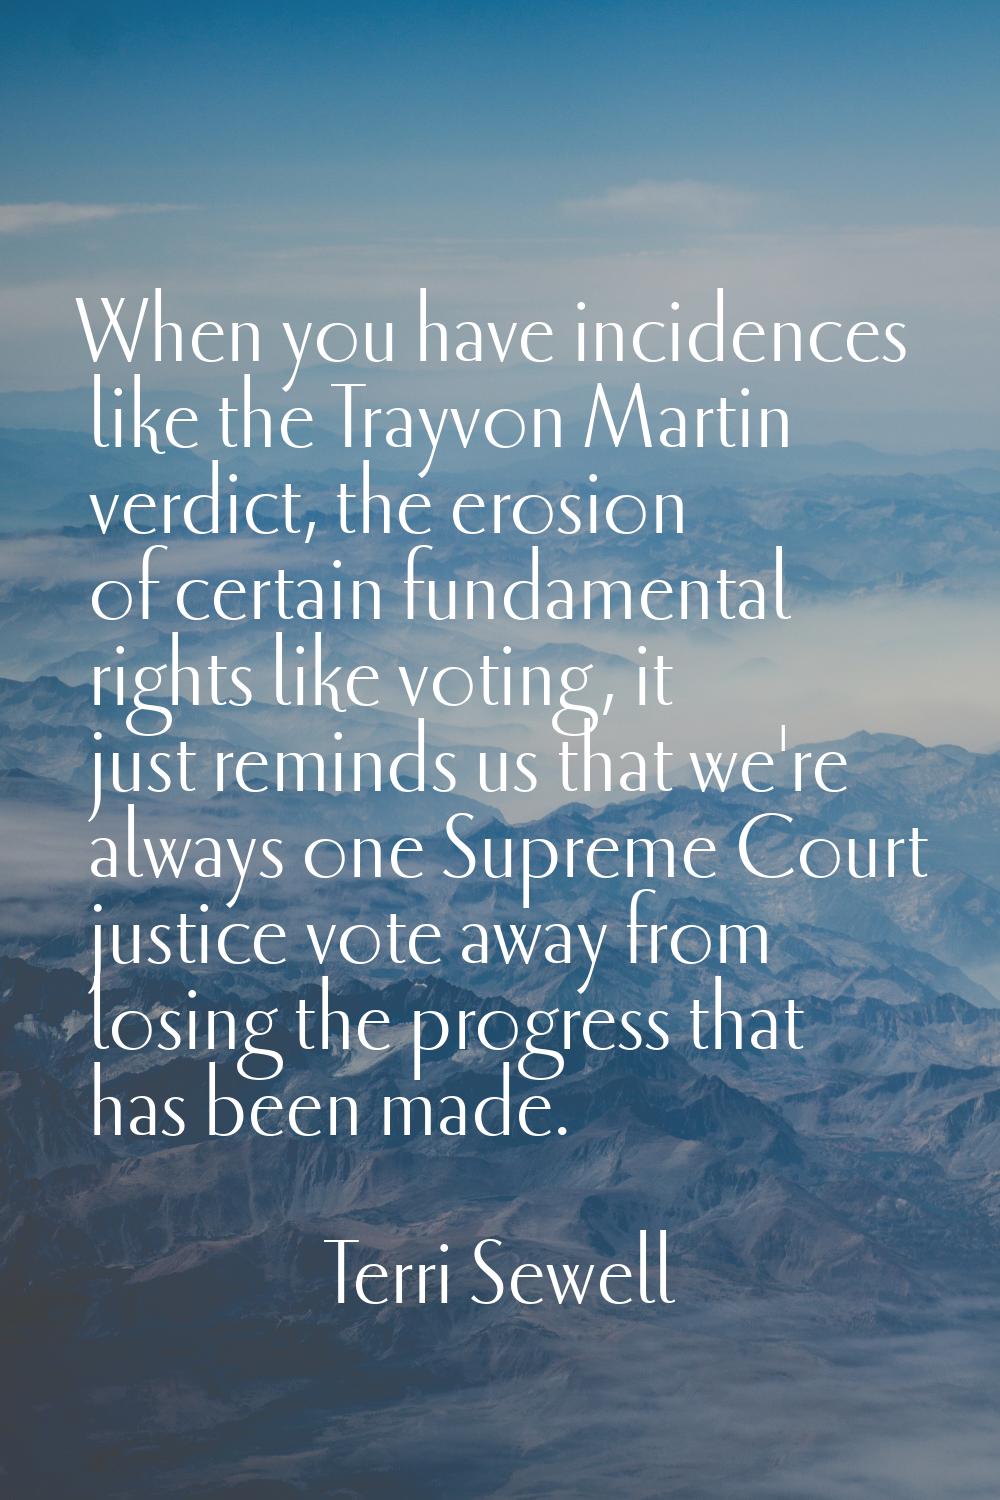 When you have incidences like the Trayvon Martin verdict, the erosion of certain fundamental rights